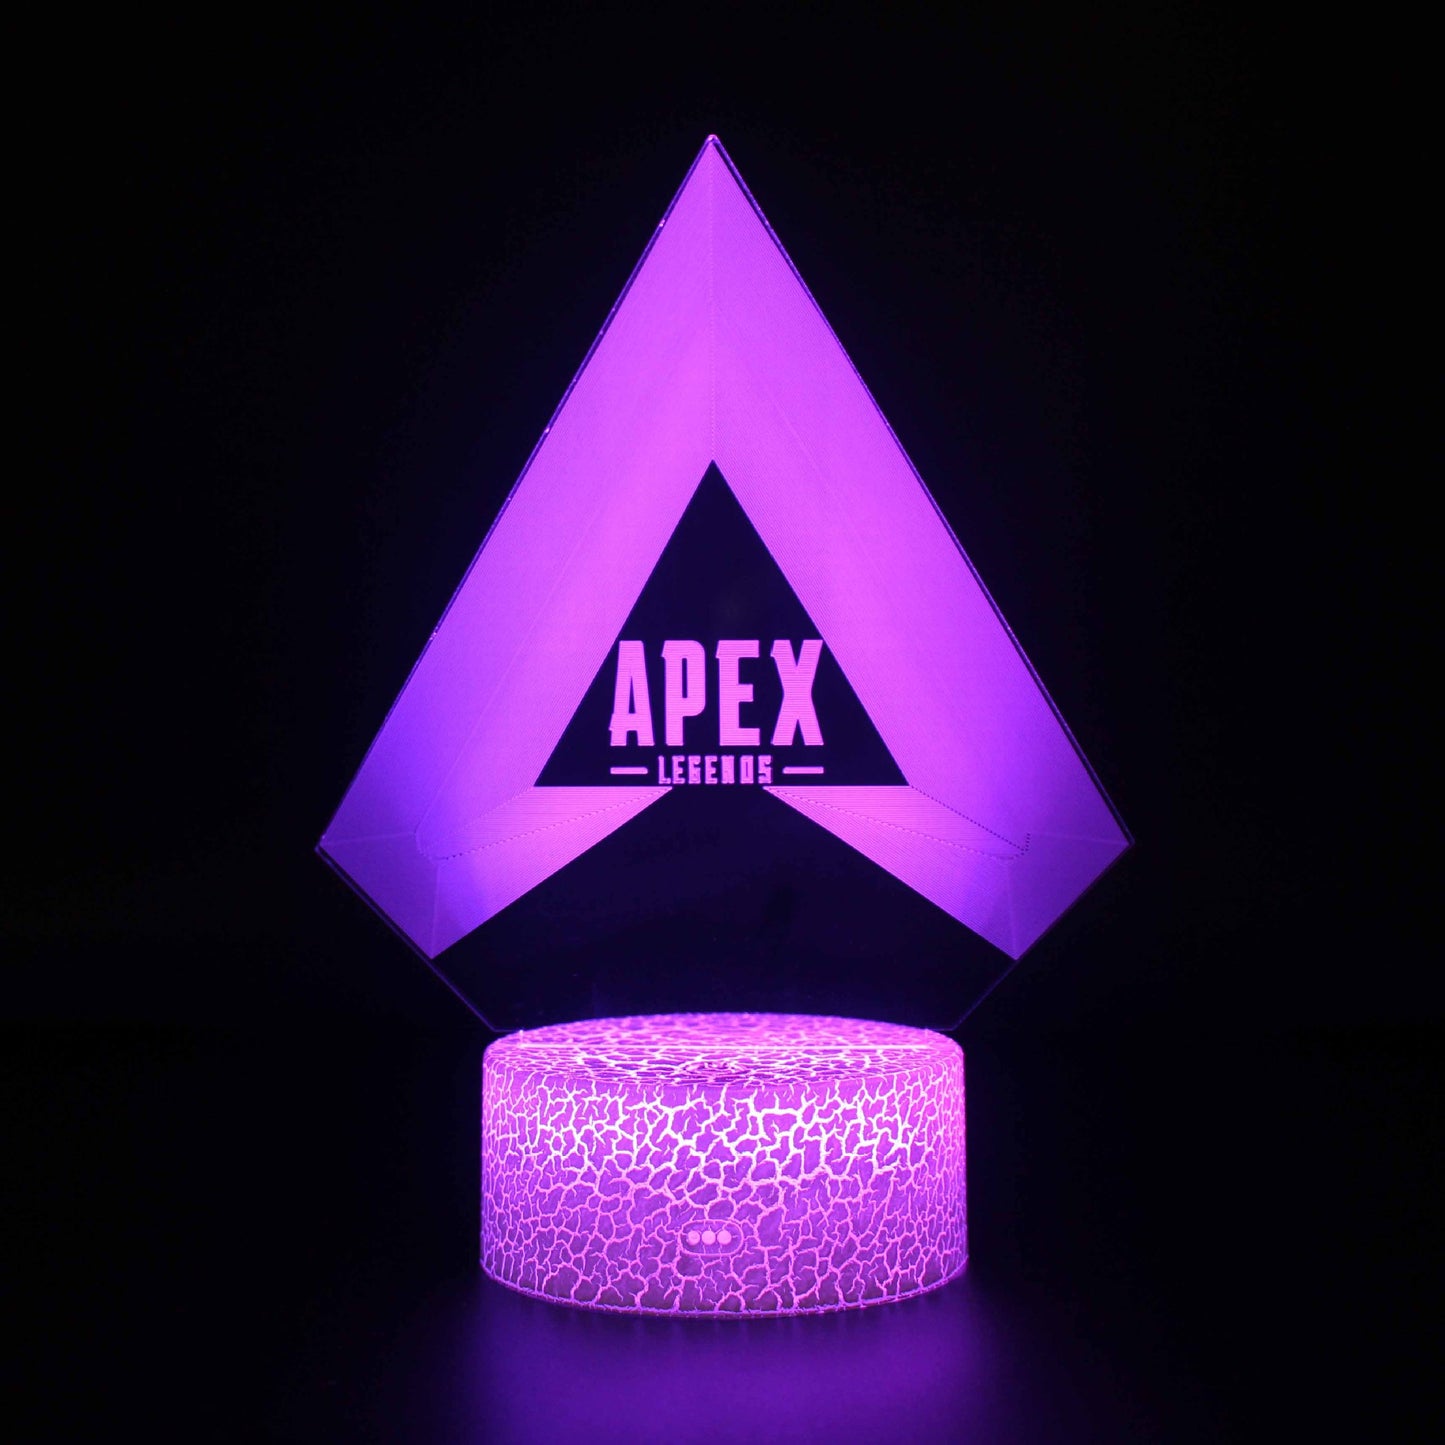 APEX Legends 3D LED Touch Lamp with optional remote control